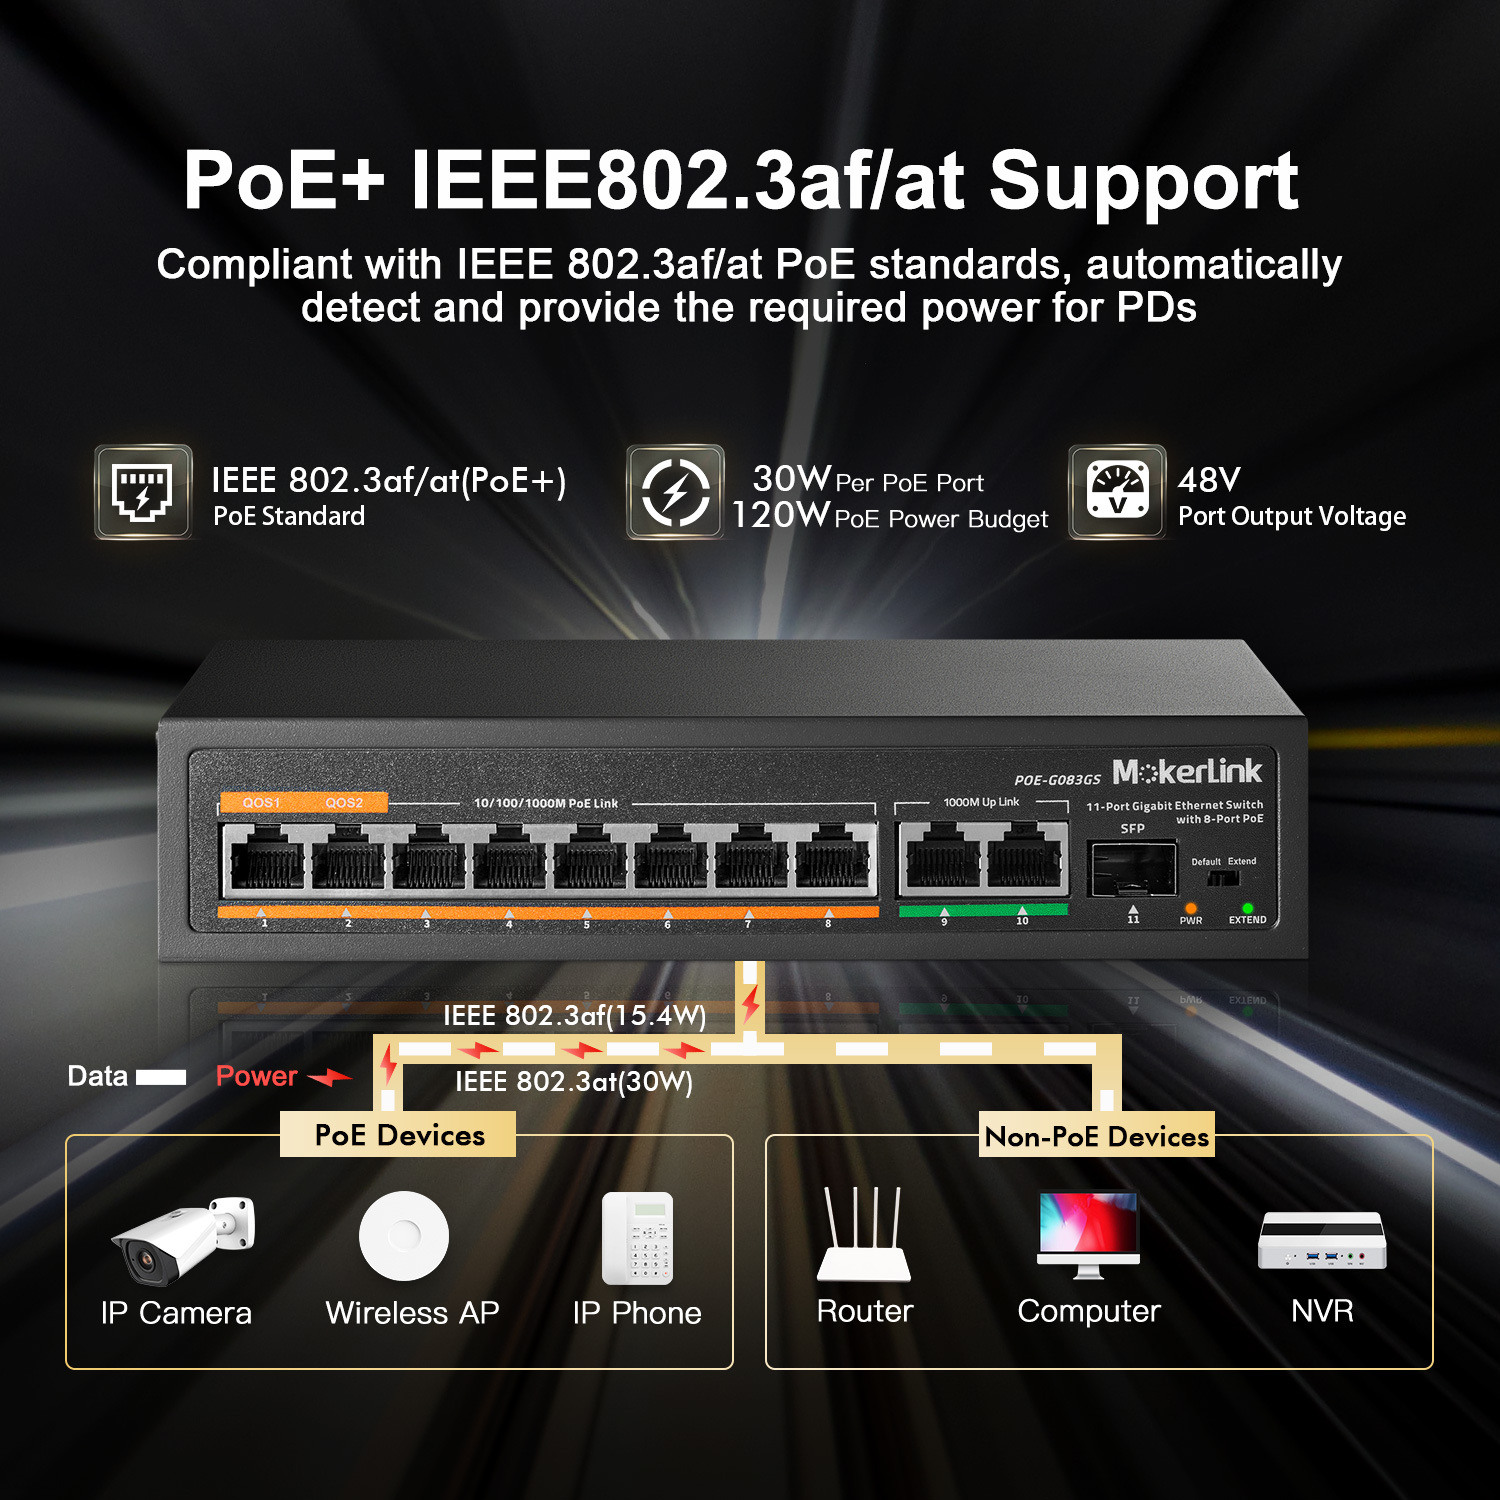 MokerLink 3 Ports Gigabit PoE Passthrough Switch, IEEE 802.3af/at